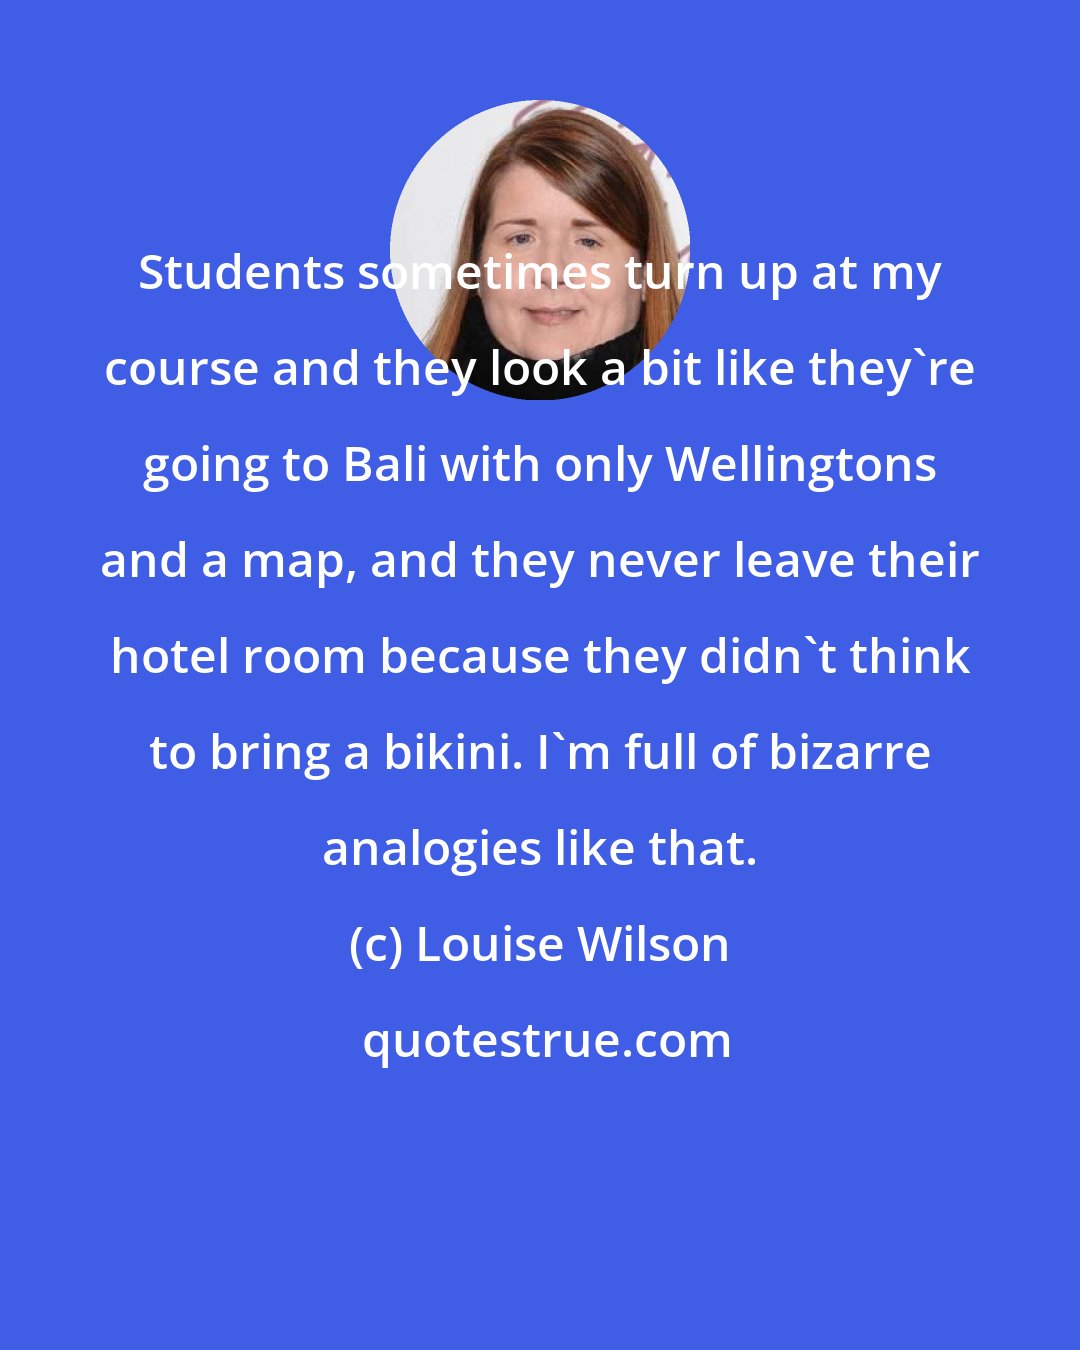 Louise Wilson: Students sometimes turn up at my course and they look a bit like they're going to Bali with only Wellingtons and a map, and they never leave their hotel room because they didn't think to bring a bikini. I'm full of bizarre analogies like that.